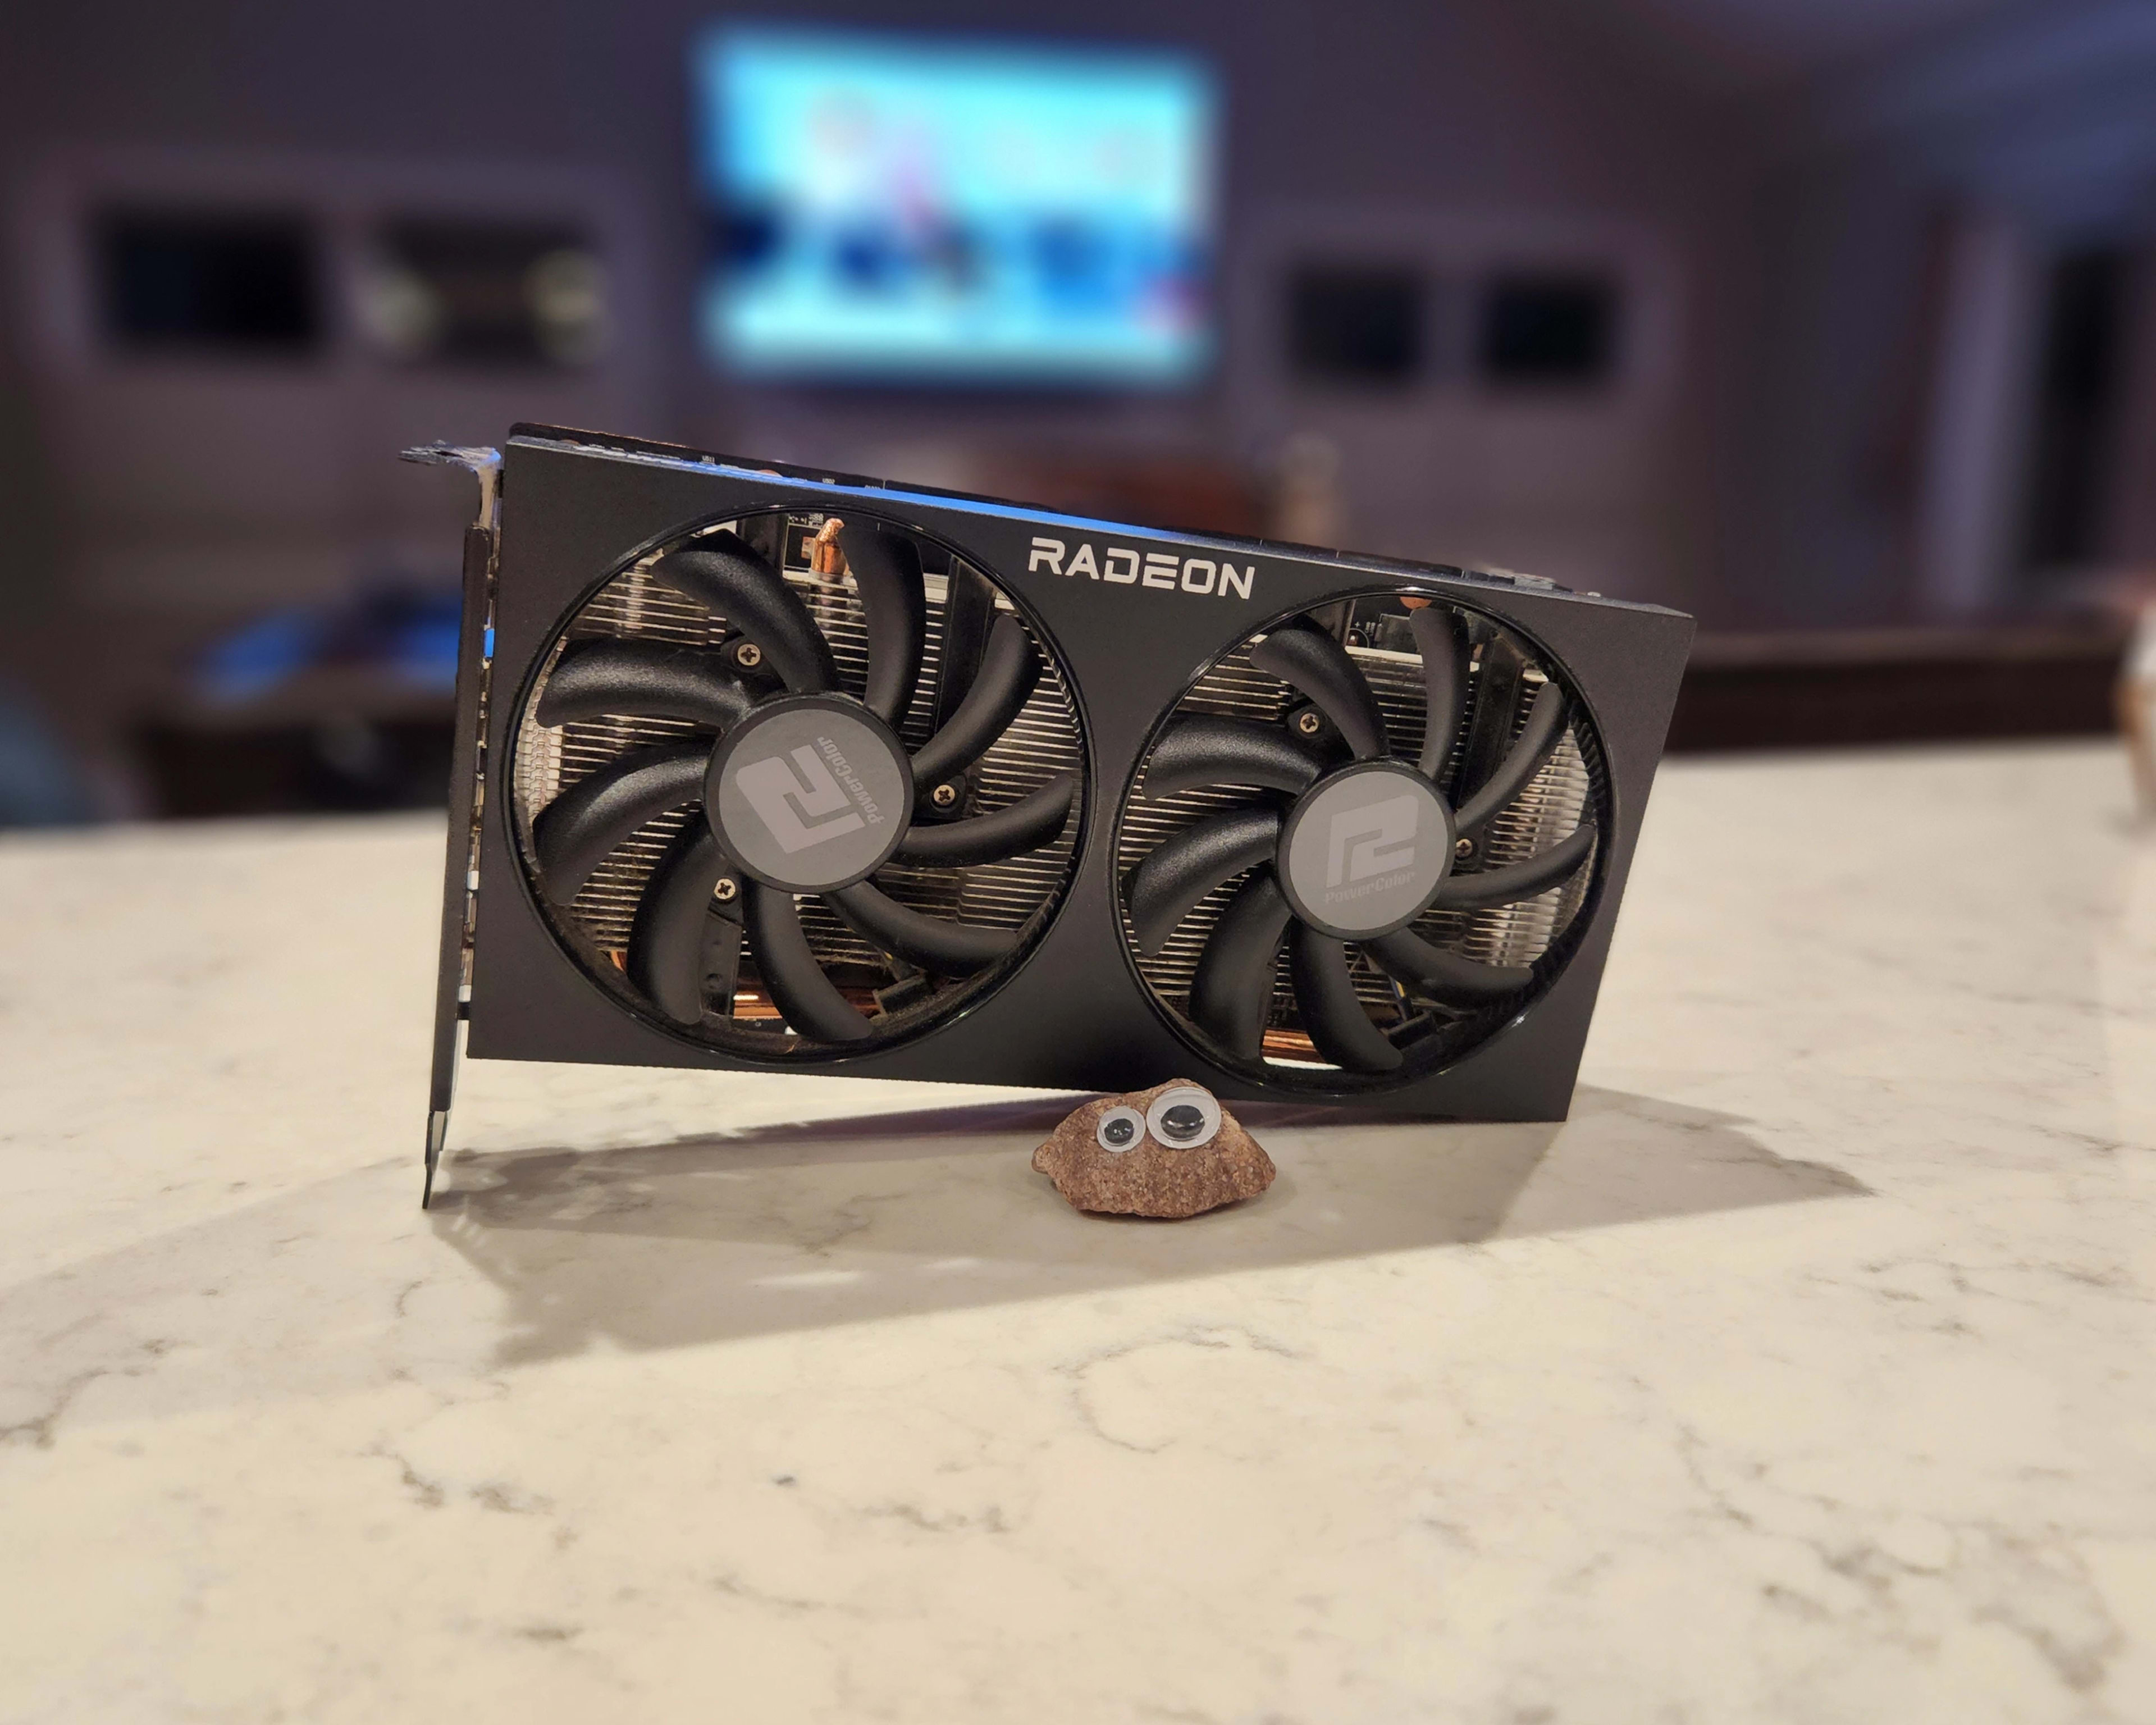 RX 6600 8GB (PowerColor Fighter) - Used